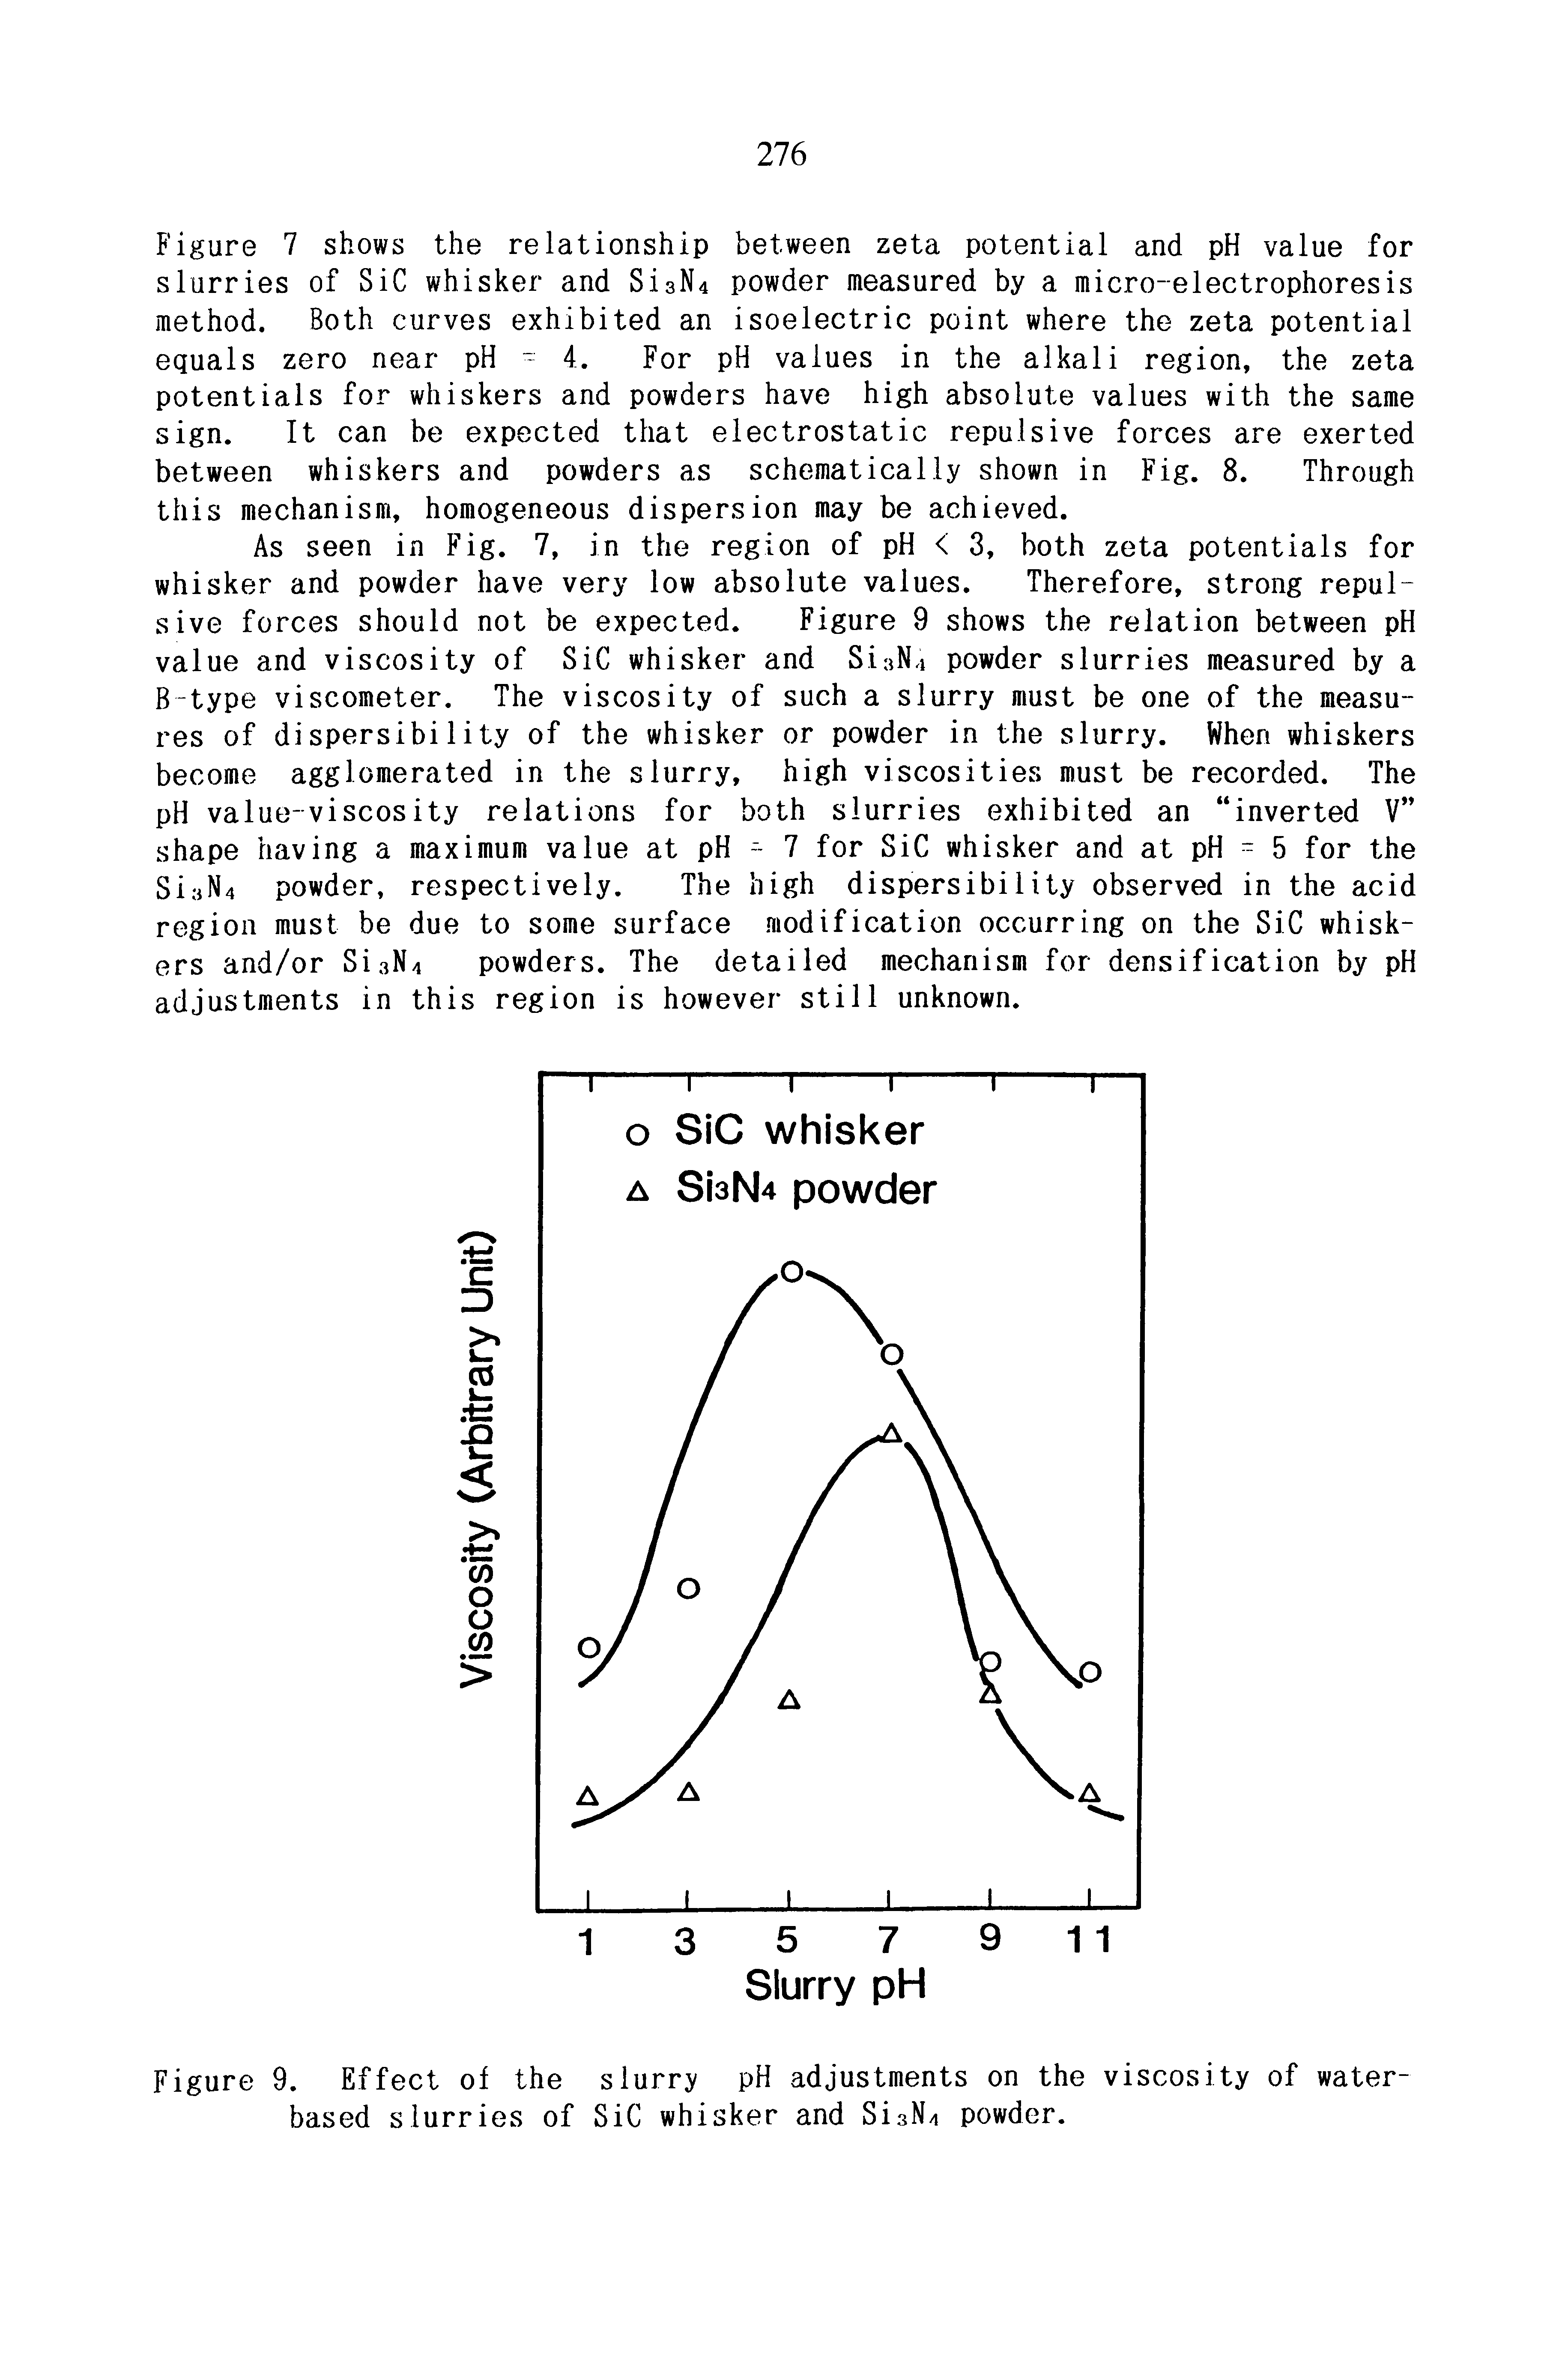 Figure 9. Effect of the slurry pH adjustments on the viscosity of water-based slurries of SiC whisker and SiaN-i powder.